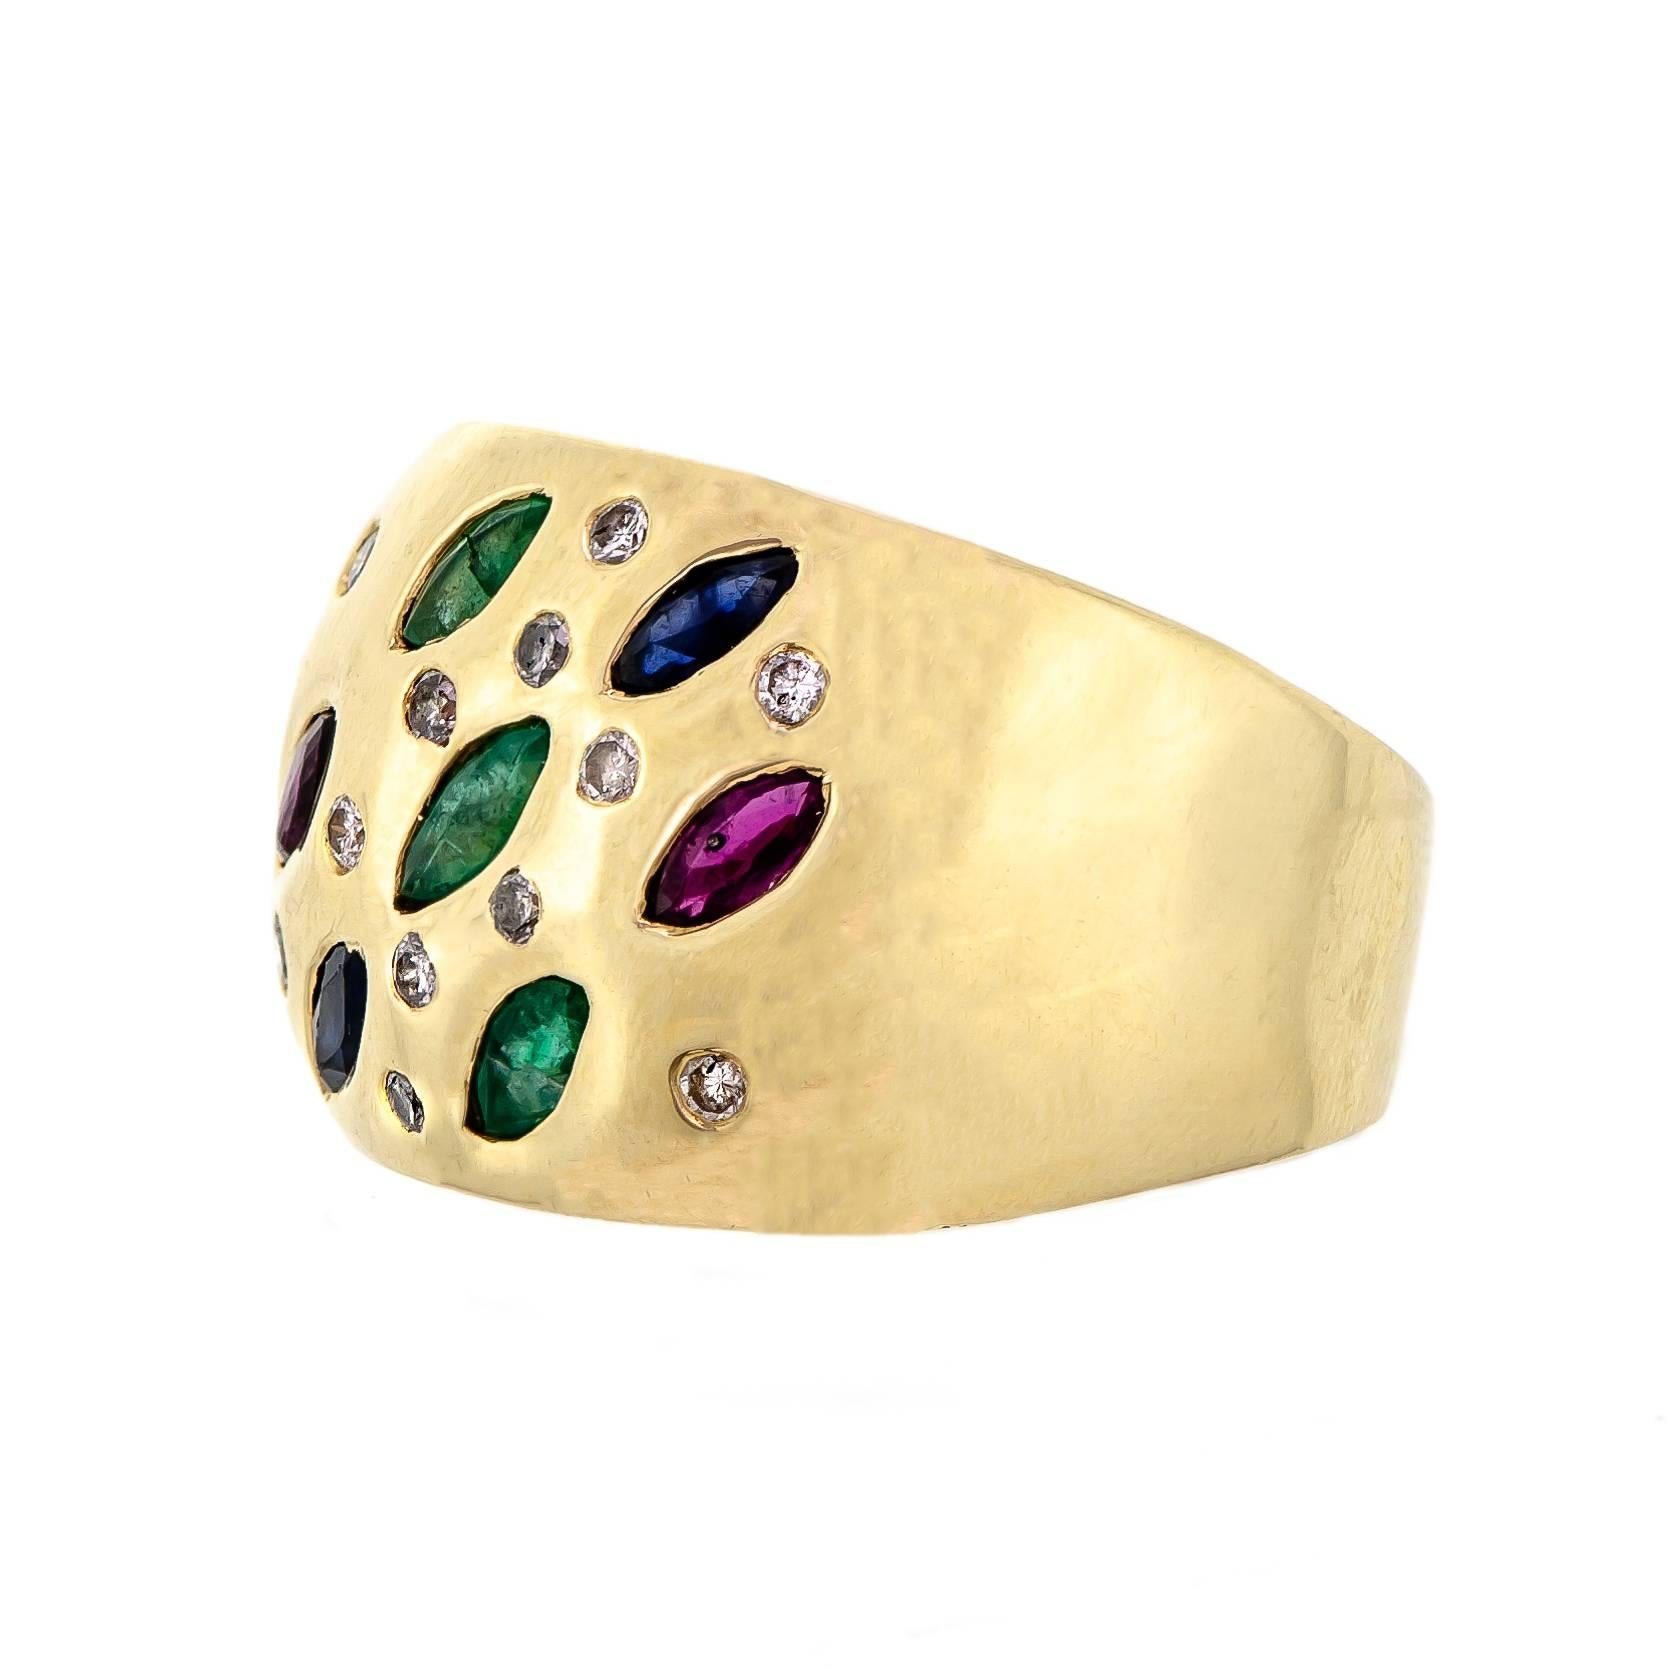 Impressive vintage heavy 14 kt diamond emerald ruby and sapphire cocktail ring. Set with three marquise emeralds, two marquise sapphires, two marquise rubies, and twelve round dazzling brilliant cut diamonds. Crafted into a heavy 14k yellow gold